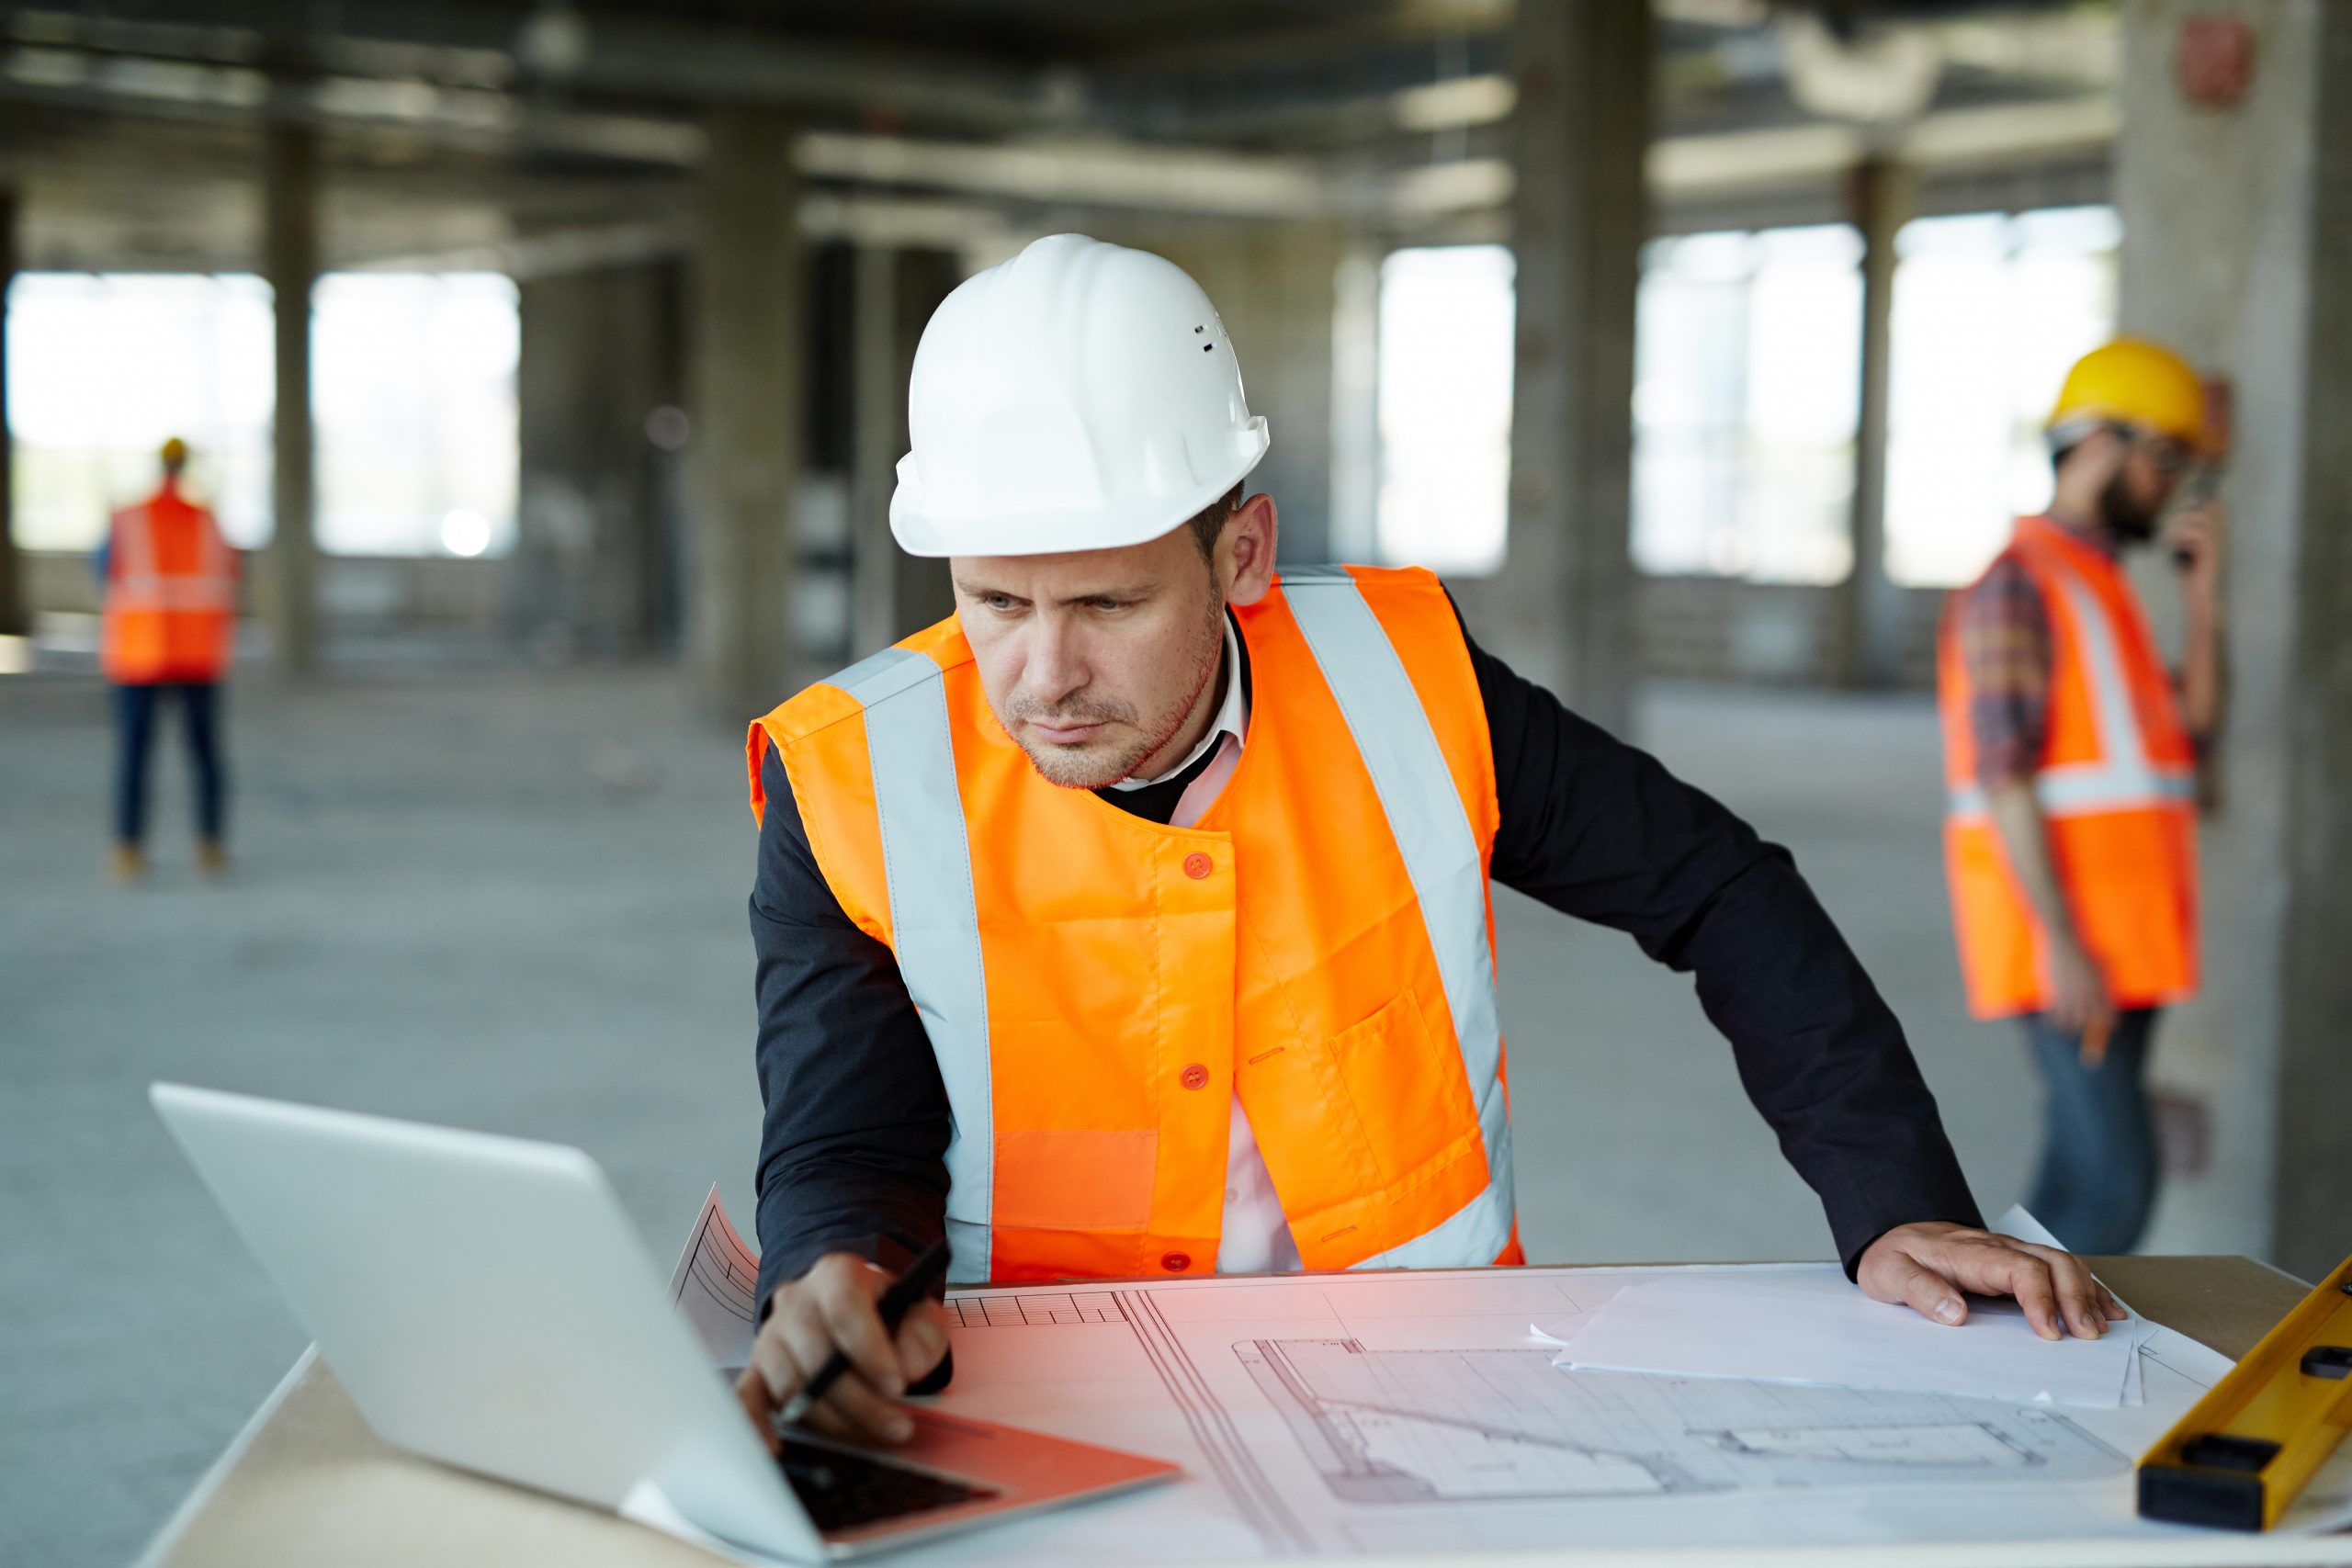 5 Safety Tips All Construction Entrepreneurs Should Know